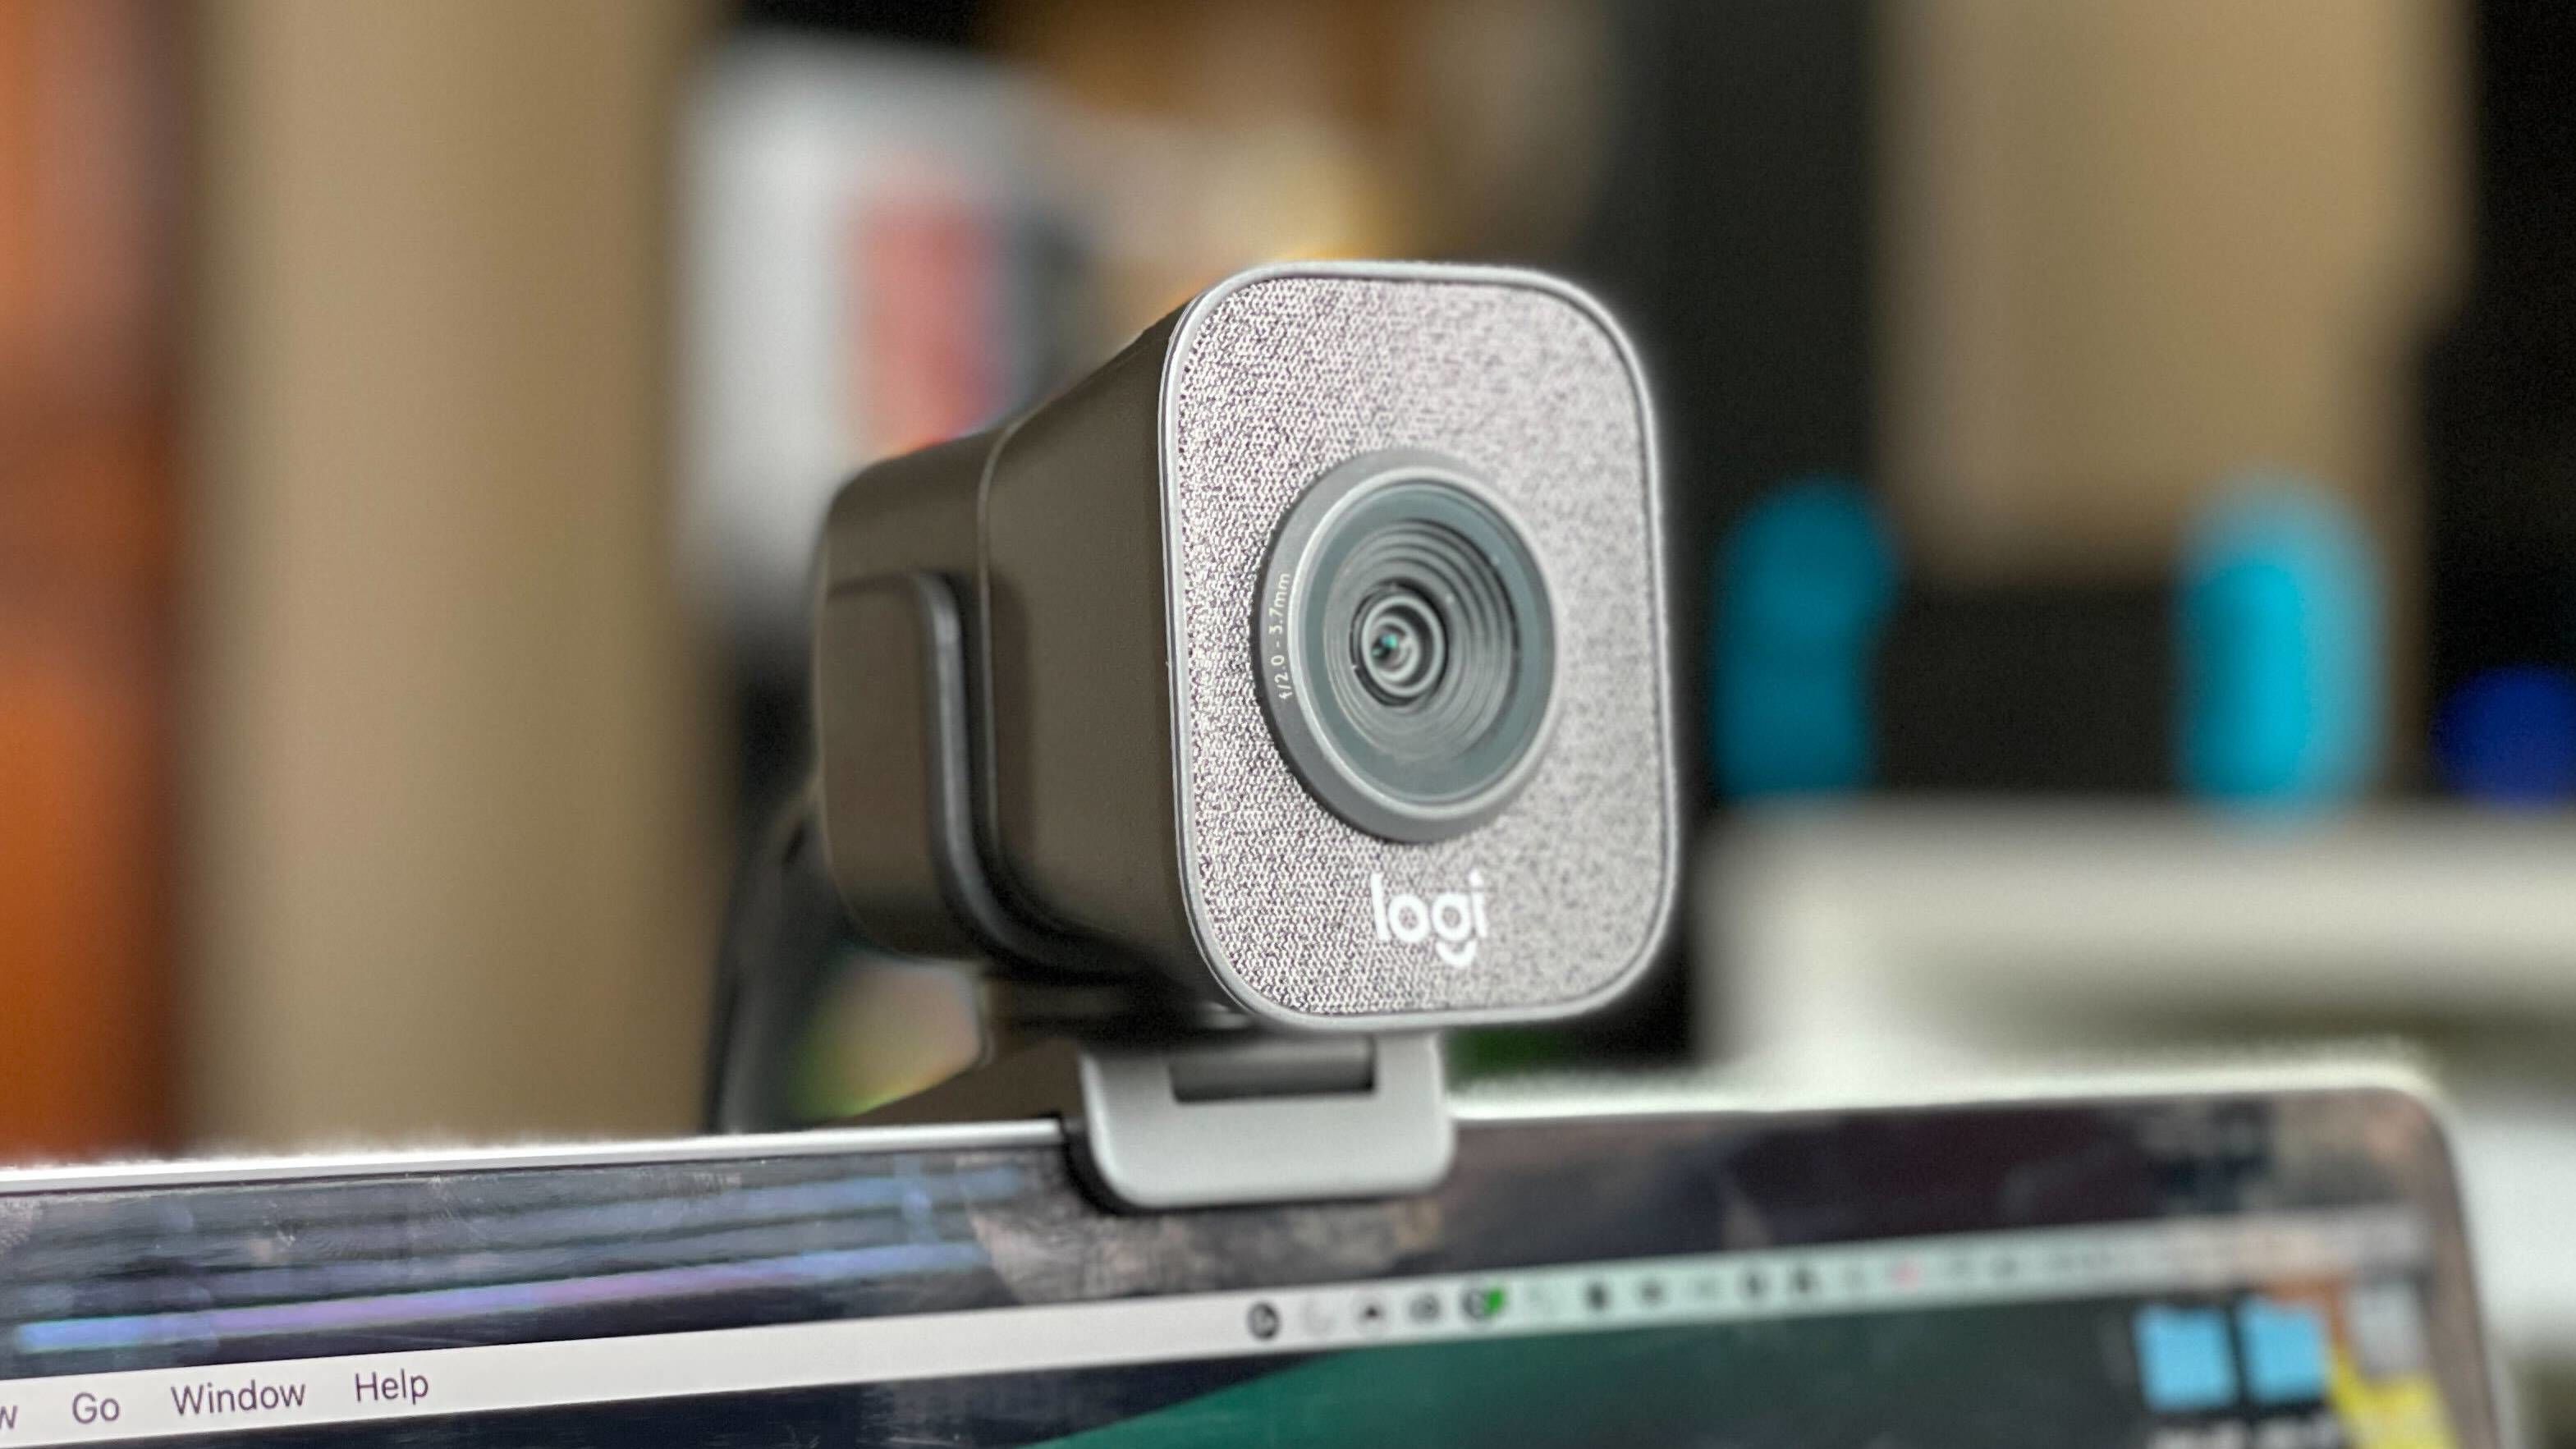 Review: Logitech StreamCam is designed with content creators in